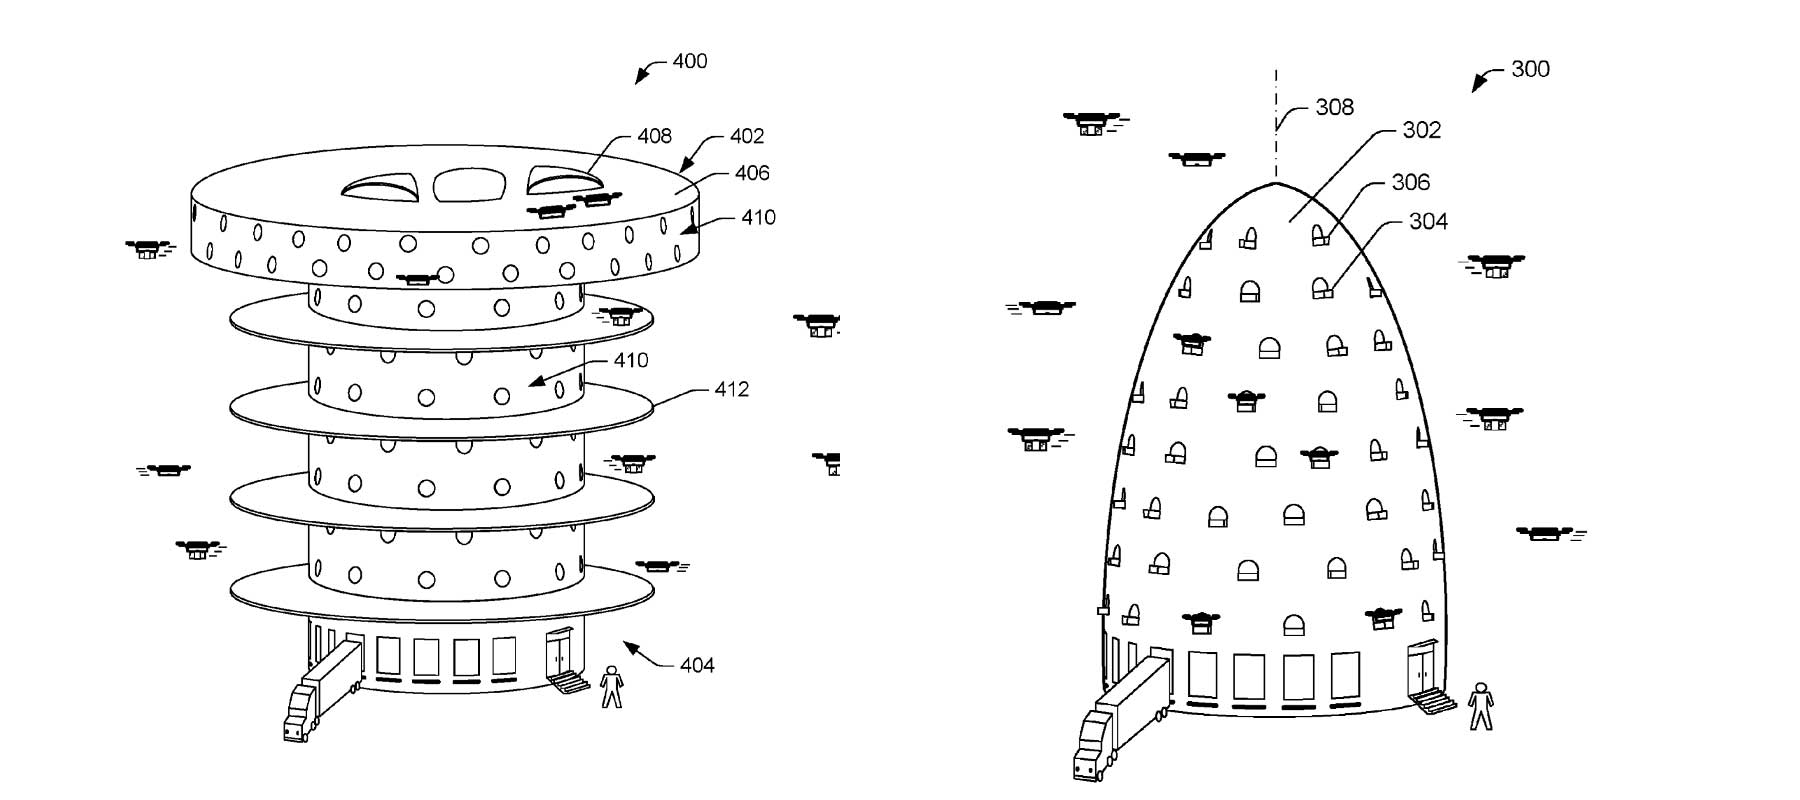 Amazon Delivery Drone Bee Hives